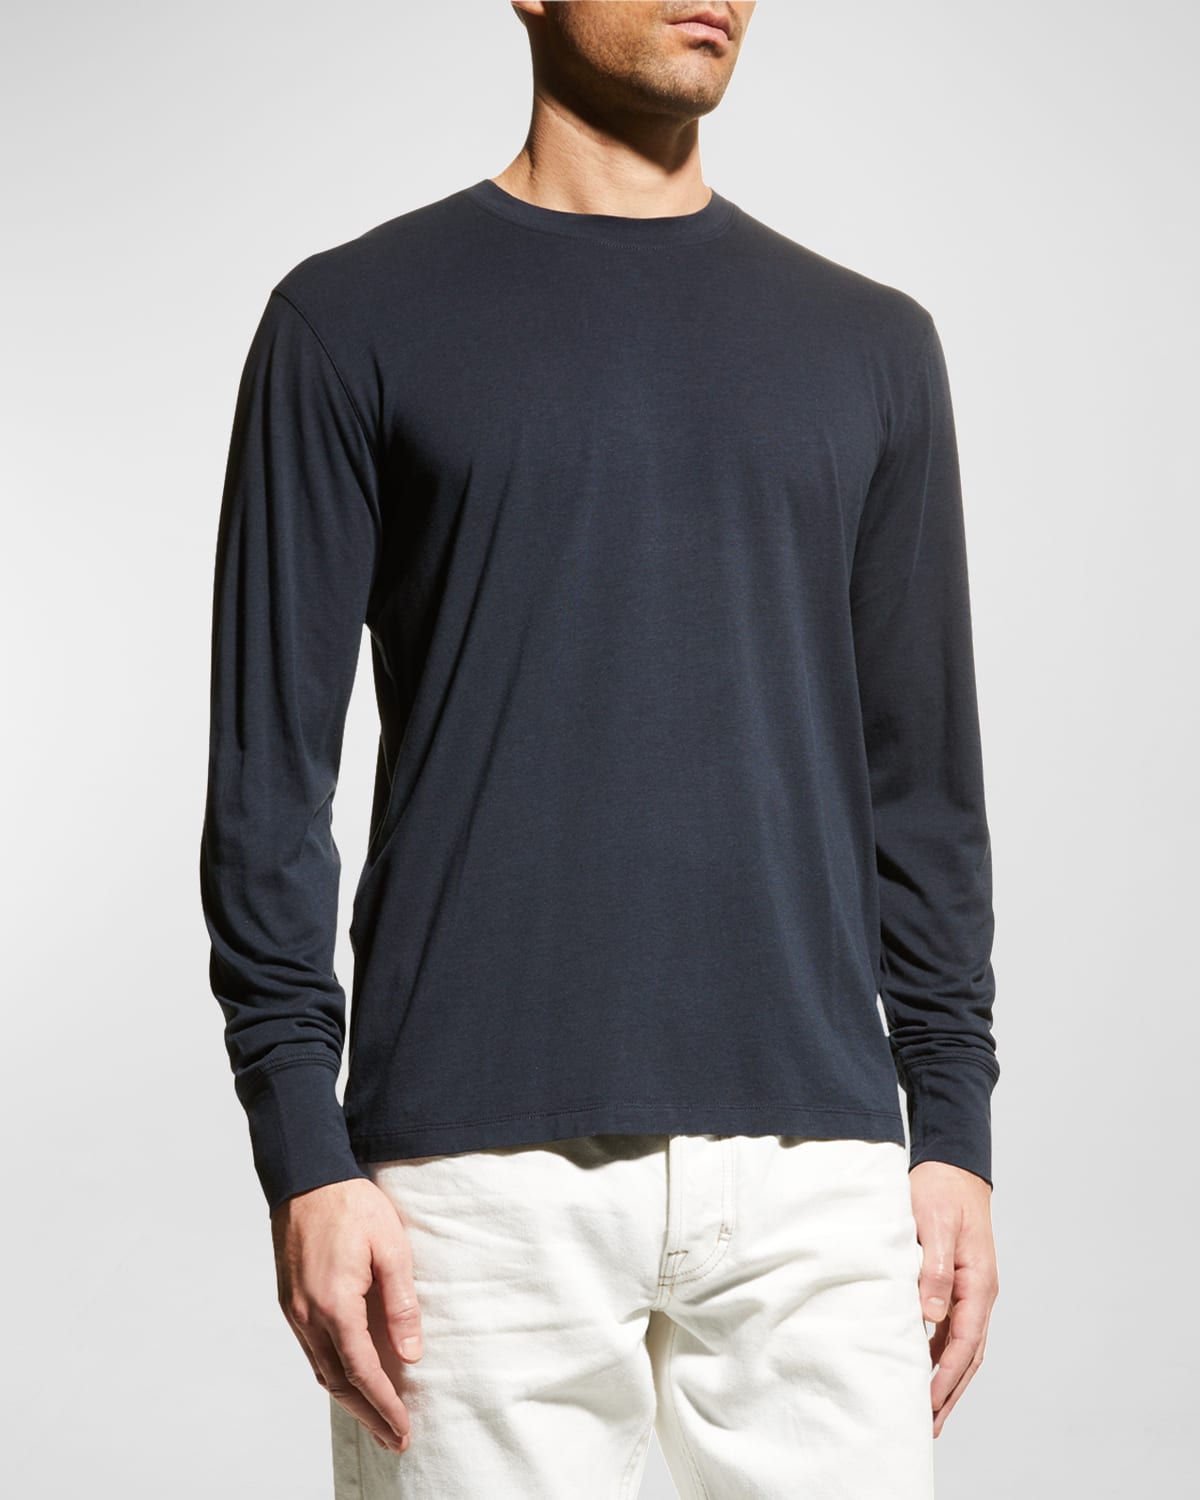 TOM FORD Men's Long-Sleeve Solid T-Shirt | Neiman Marcus